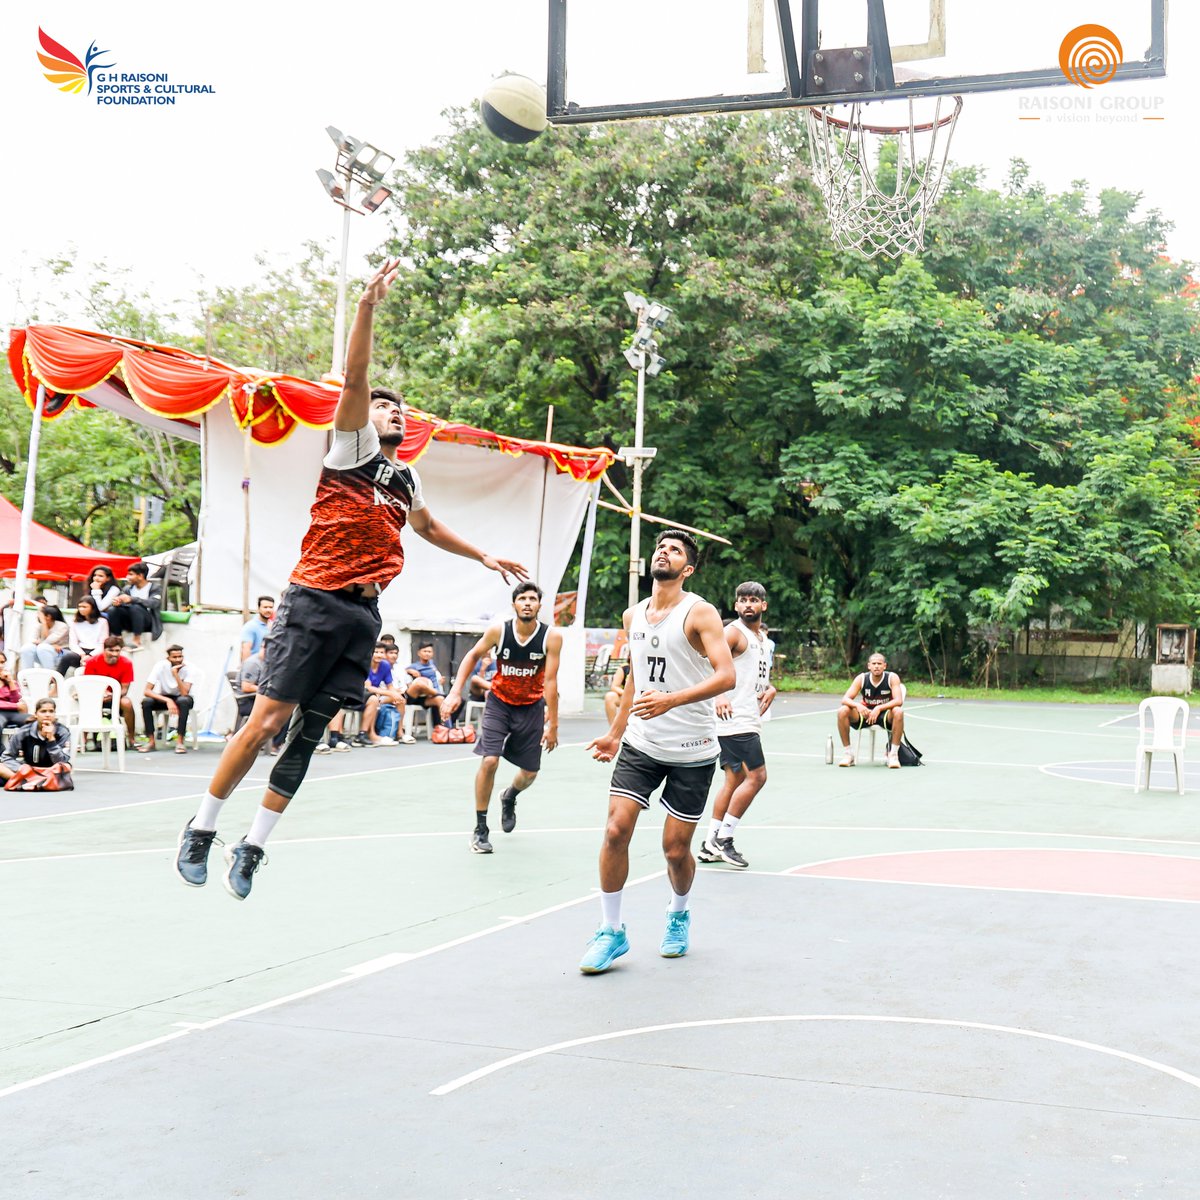 The courts blazed at GHR Memorial Maha Basket 3x3 Tournament! Orange city witnessed thrilling hoops with jaw-dropping dunks, crossovers, and clutch shots. Congratulations to all players for their incredible skills and sportsmanship! #MahaBasket3x3 #GHRaisoniMemorial